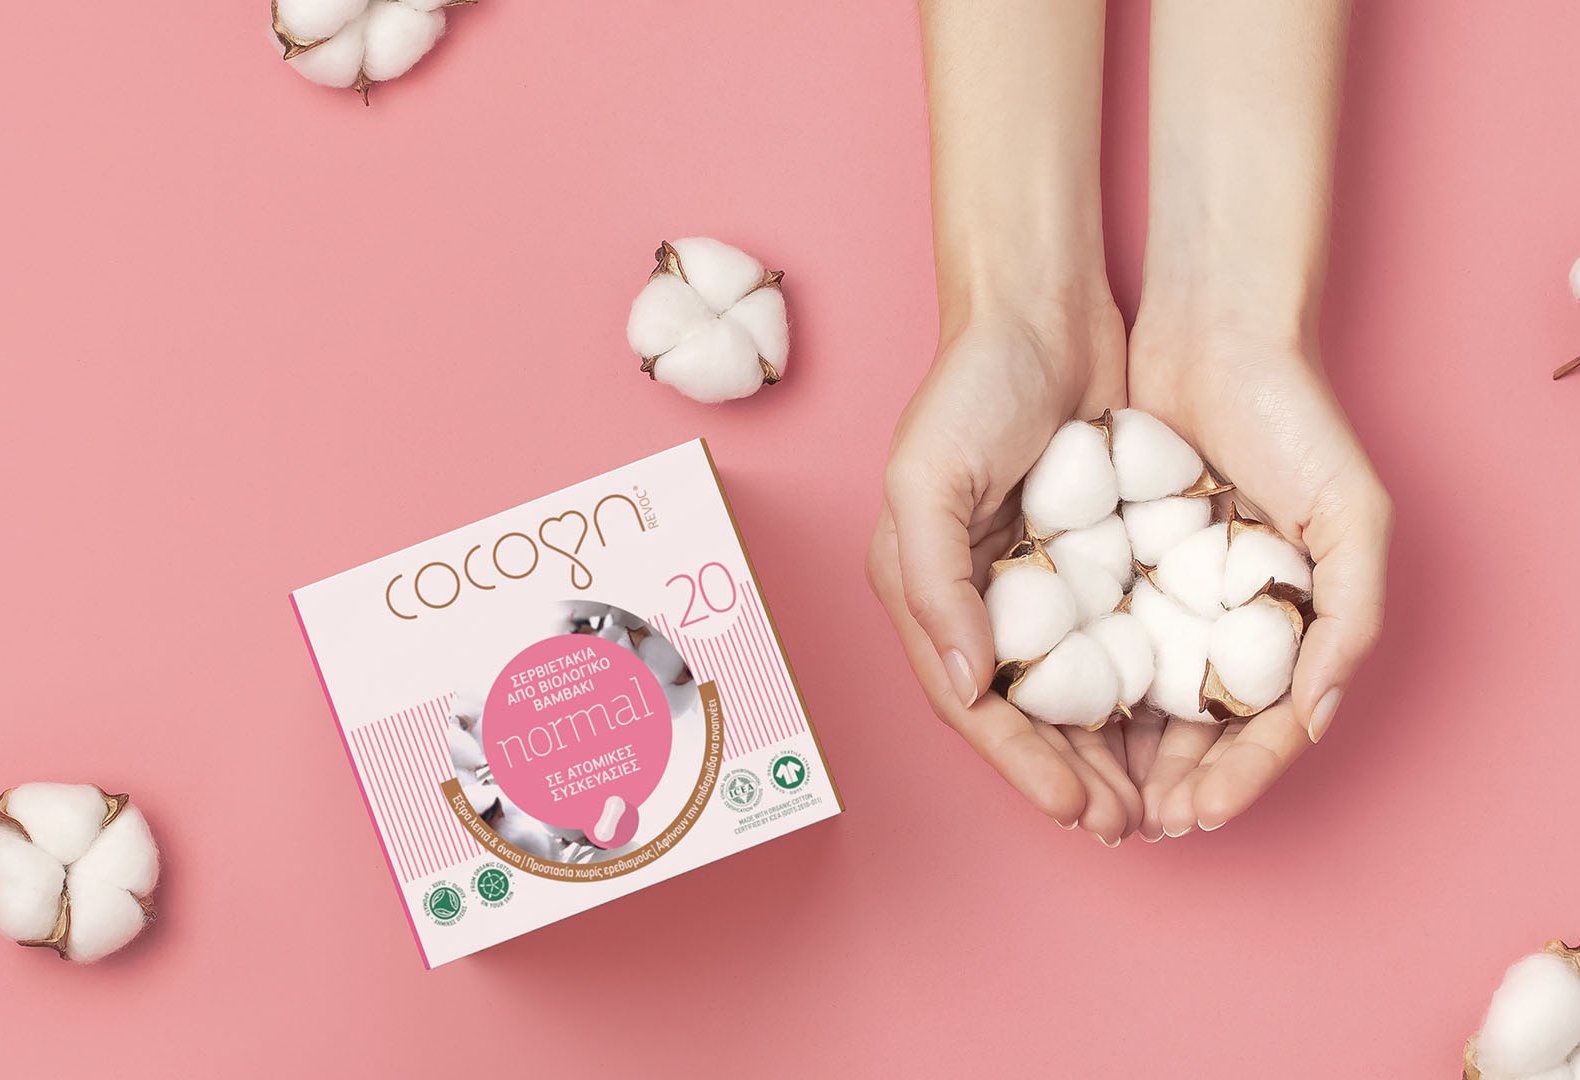 Cocoon biodegradable sanitary pads carton box next to hands holding cotton